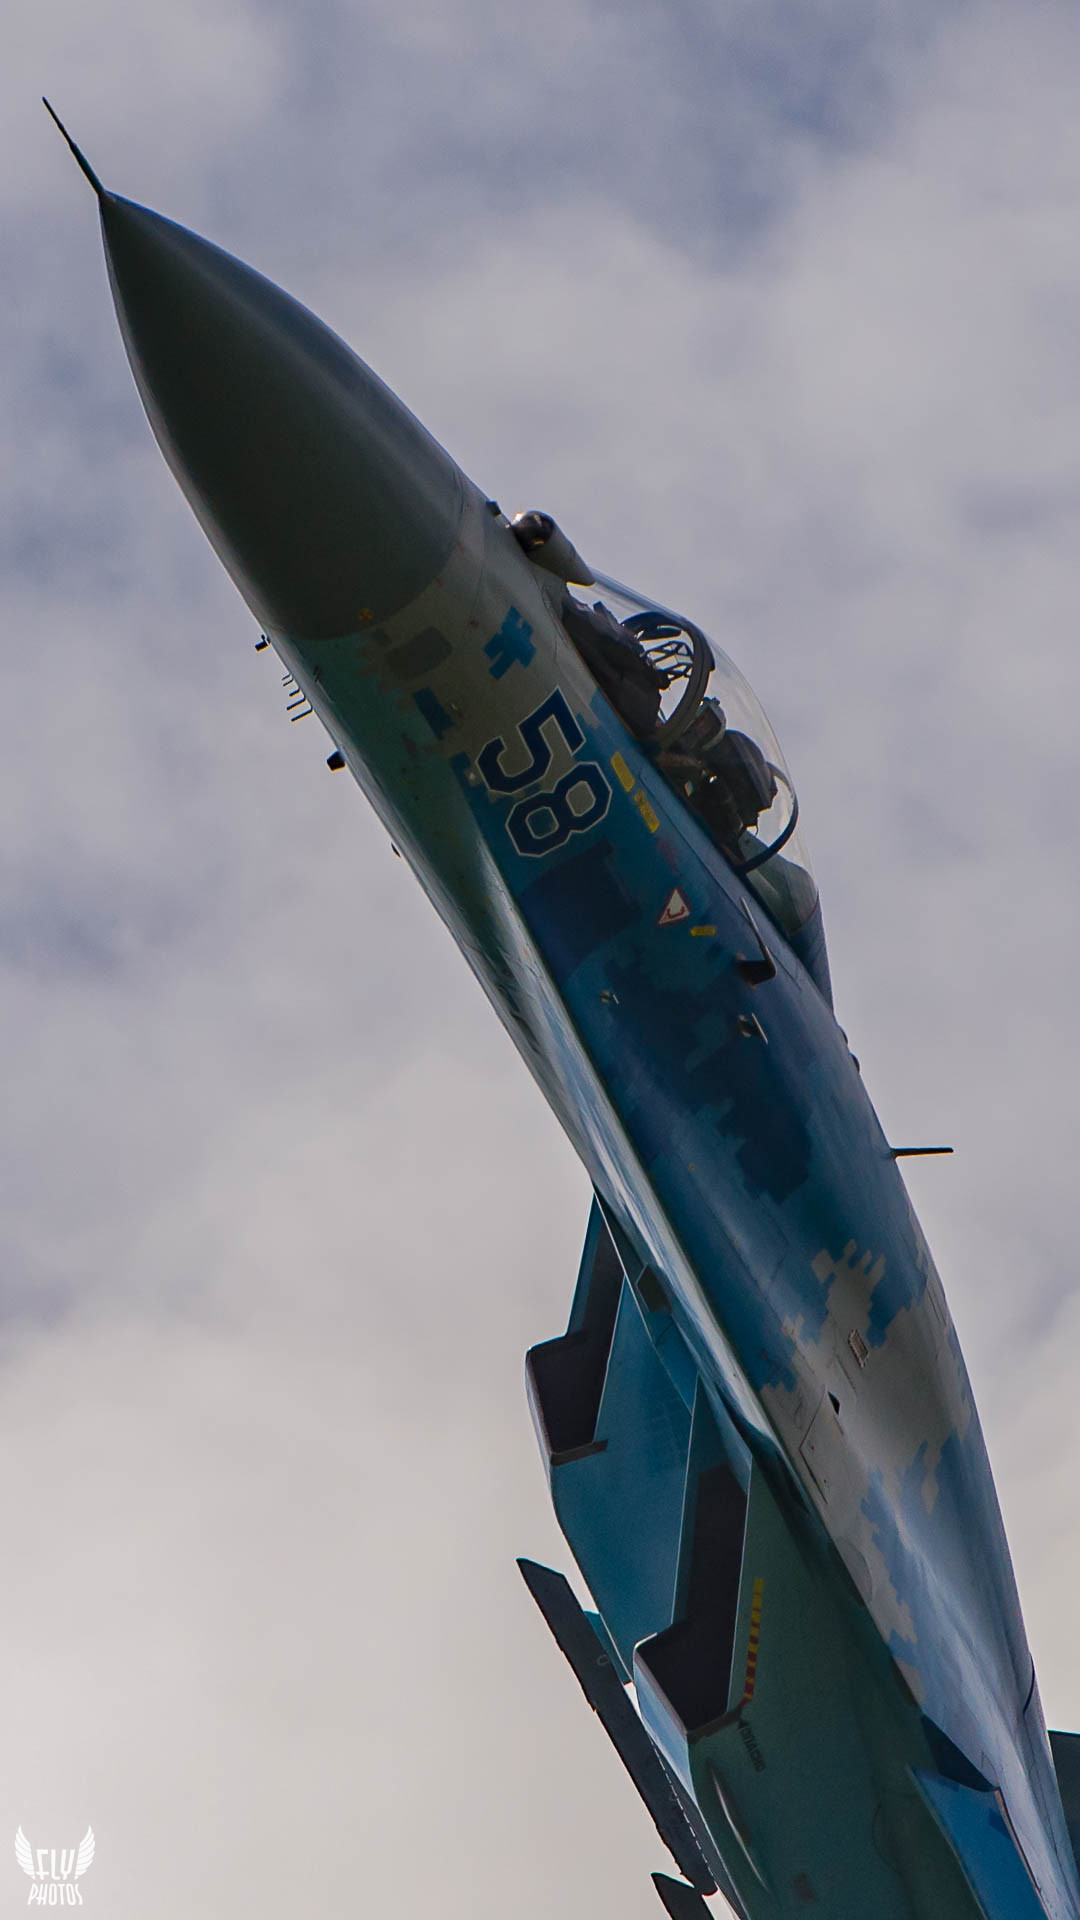 Photo of the day: A SU-27’s closer look